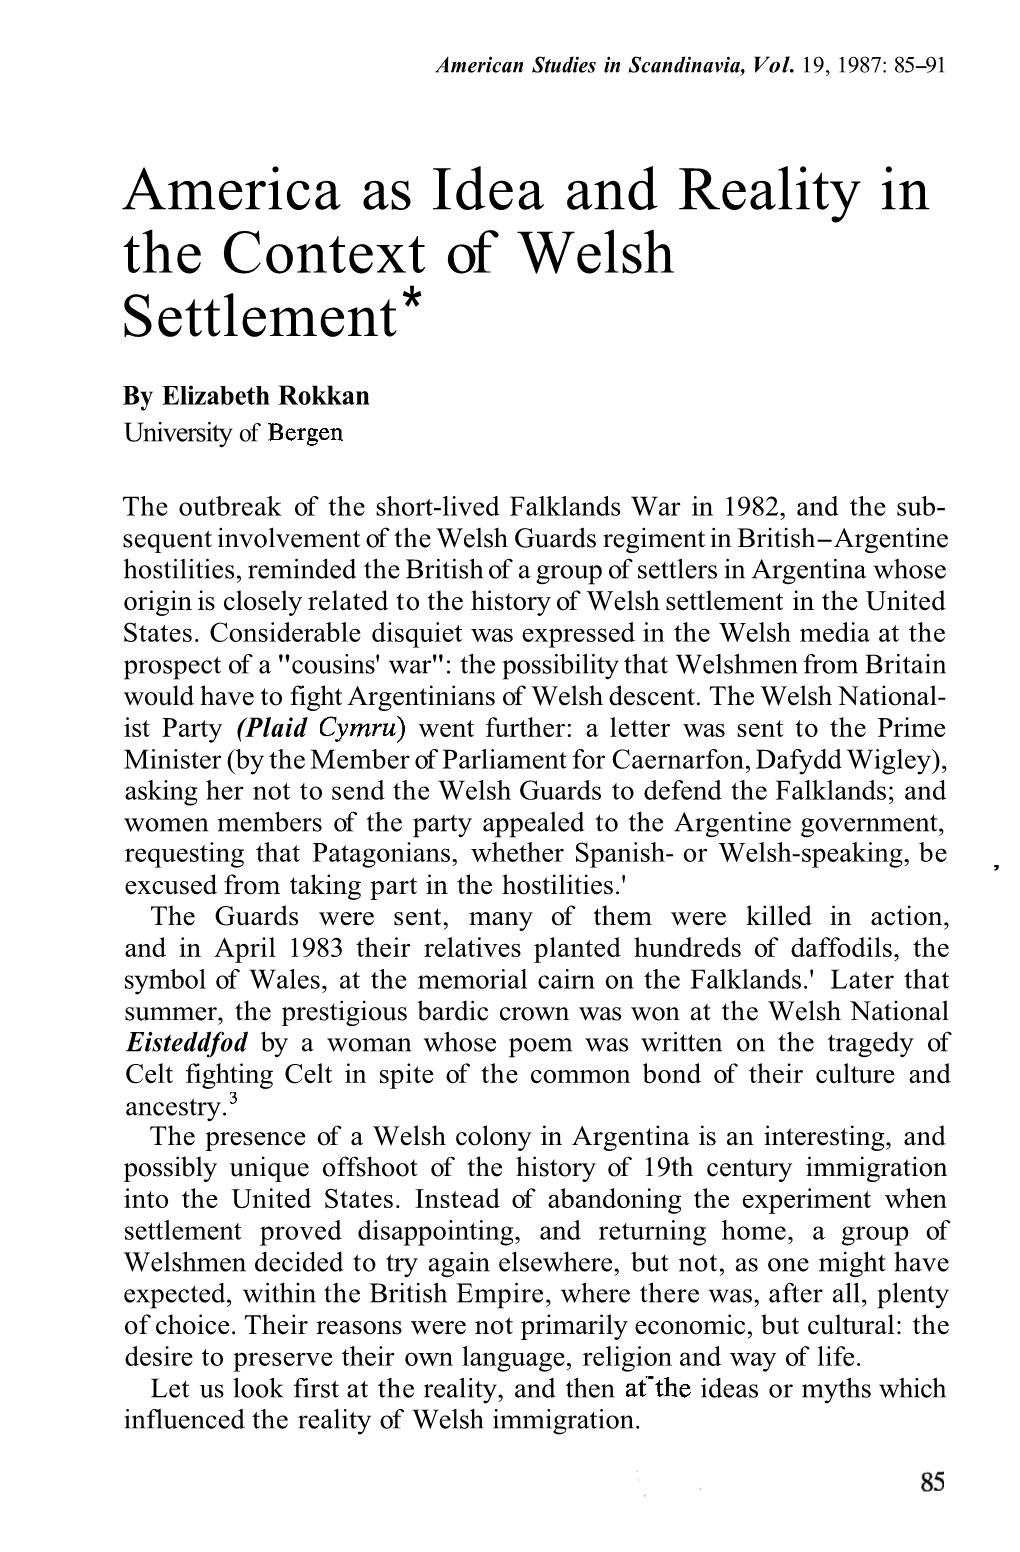 America As Idea and Reality in the Context of Welsh Settlement *